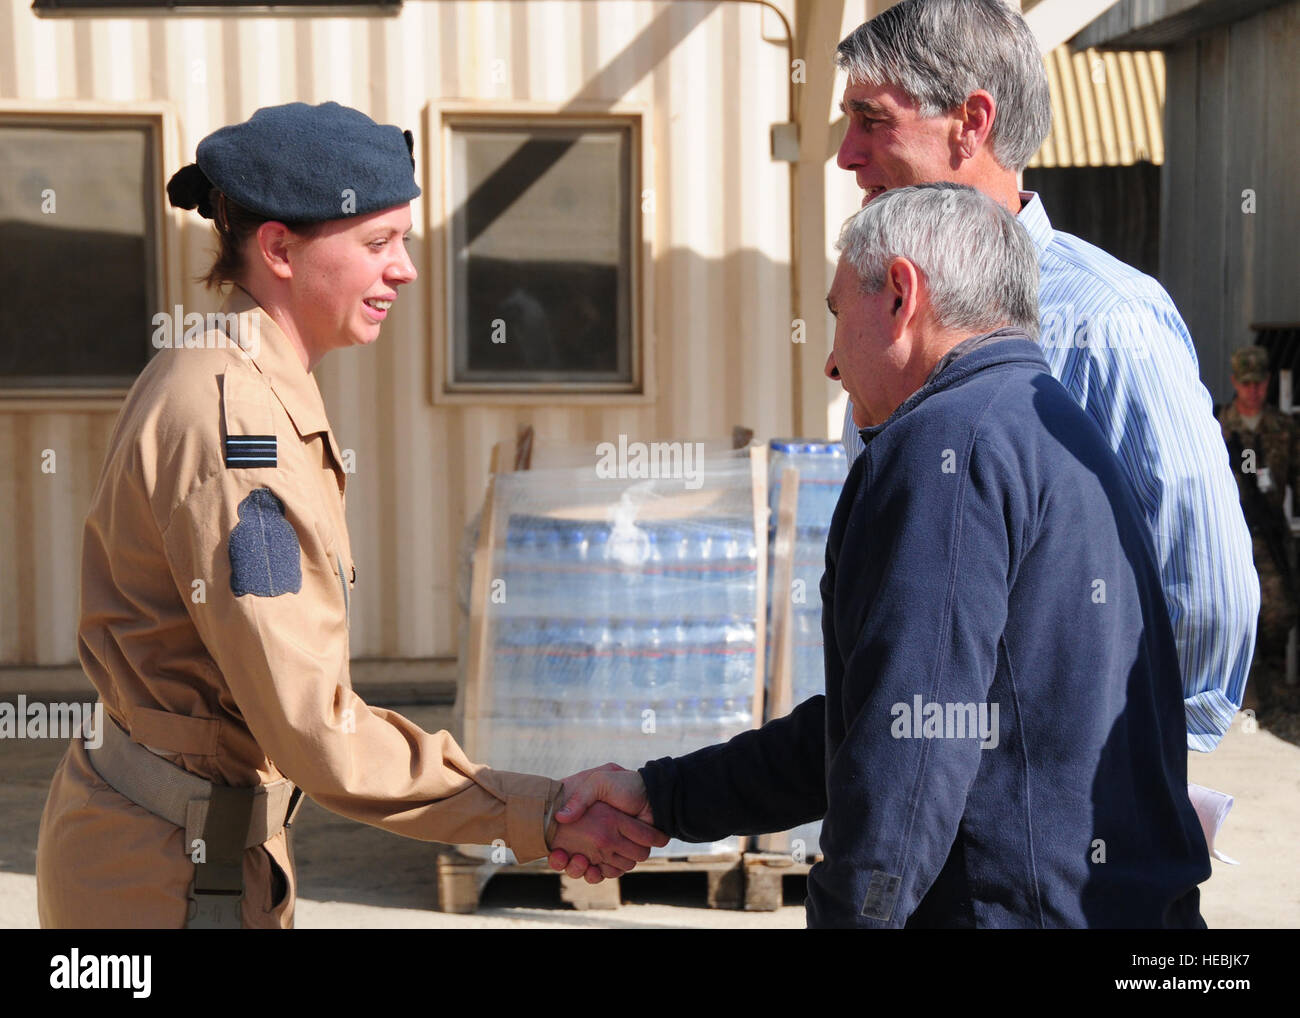 Royal Air Force Flight Lt. Ally McDowell, left, shakes hands with U.S. Sen. Jack Reed of Rhode Island in Thunder Lab at Kabul International Airport in Kabul, Afghanistan, Oct. 26, 2011. Thunder Lab was an English immersion program for Afghan officers to help prepare select trainees for pilot training. (U.S. Air Force photo by Senior Airman Amber Williams/Released) Stock Photo